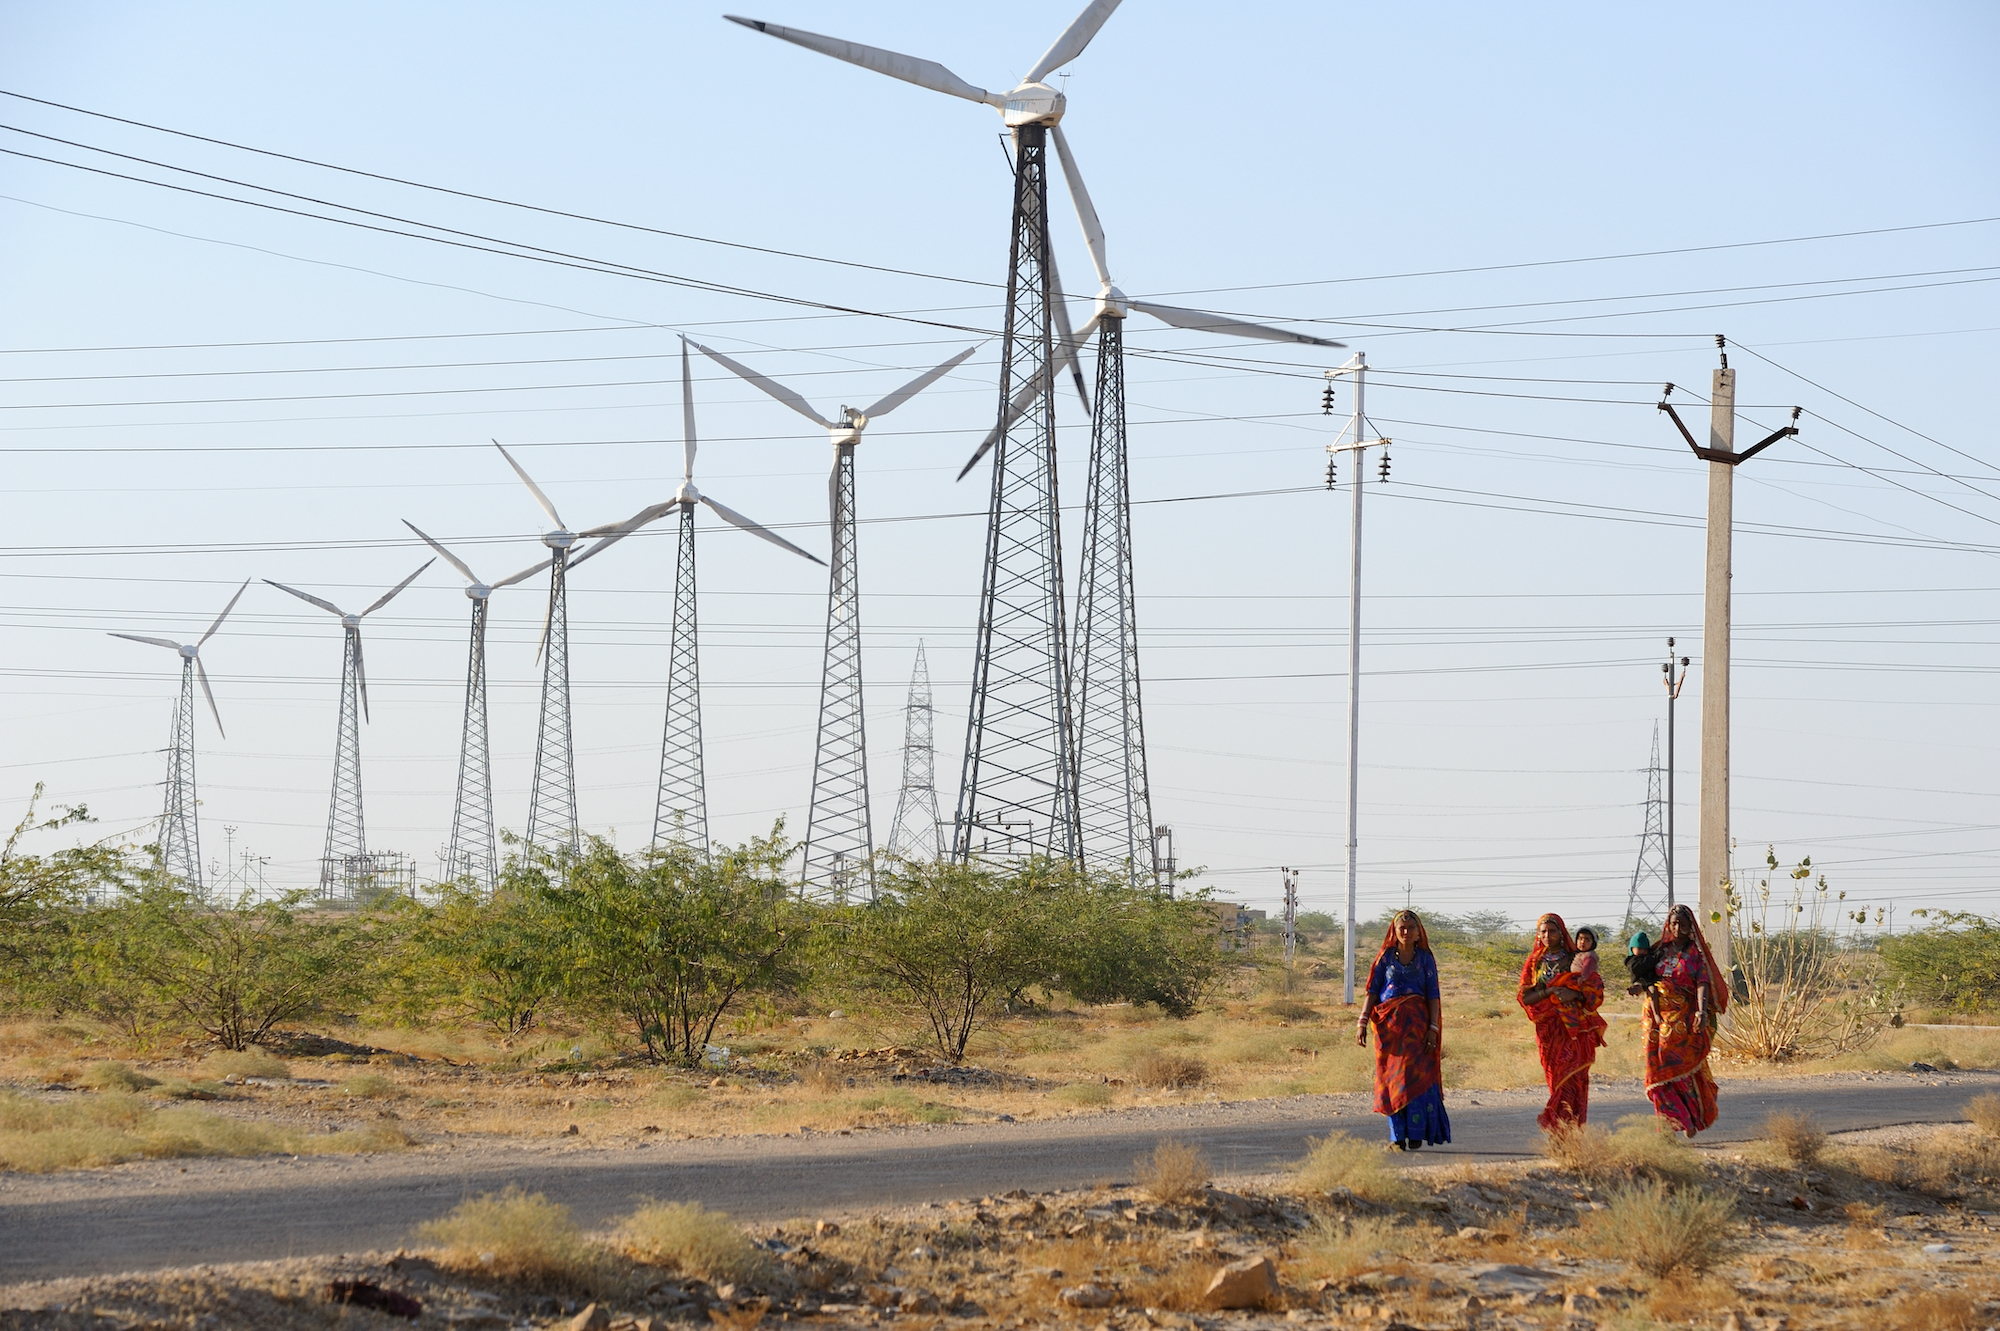 There women using red and bule saris walk on a pavement road in india. on the background, against a pale blue sky, several wind energy mills sprout from the earth.